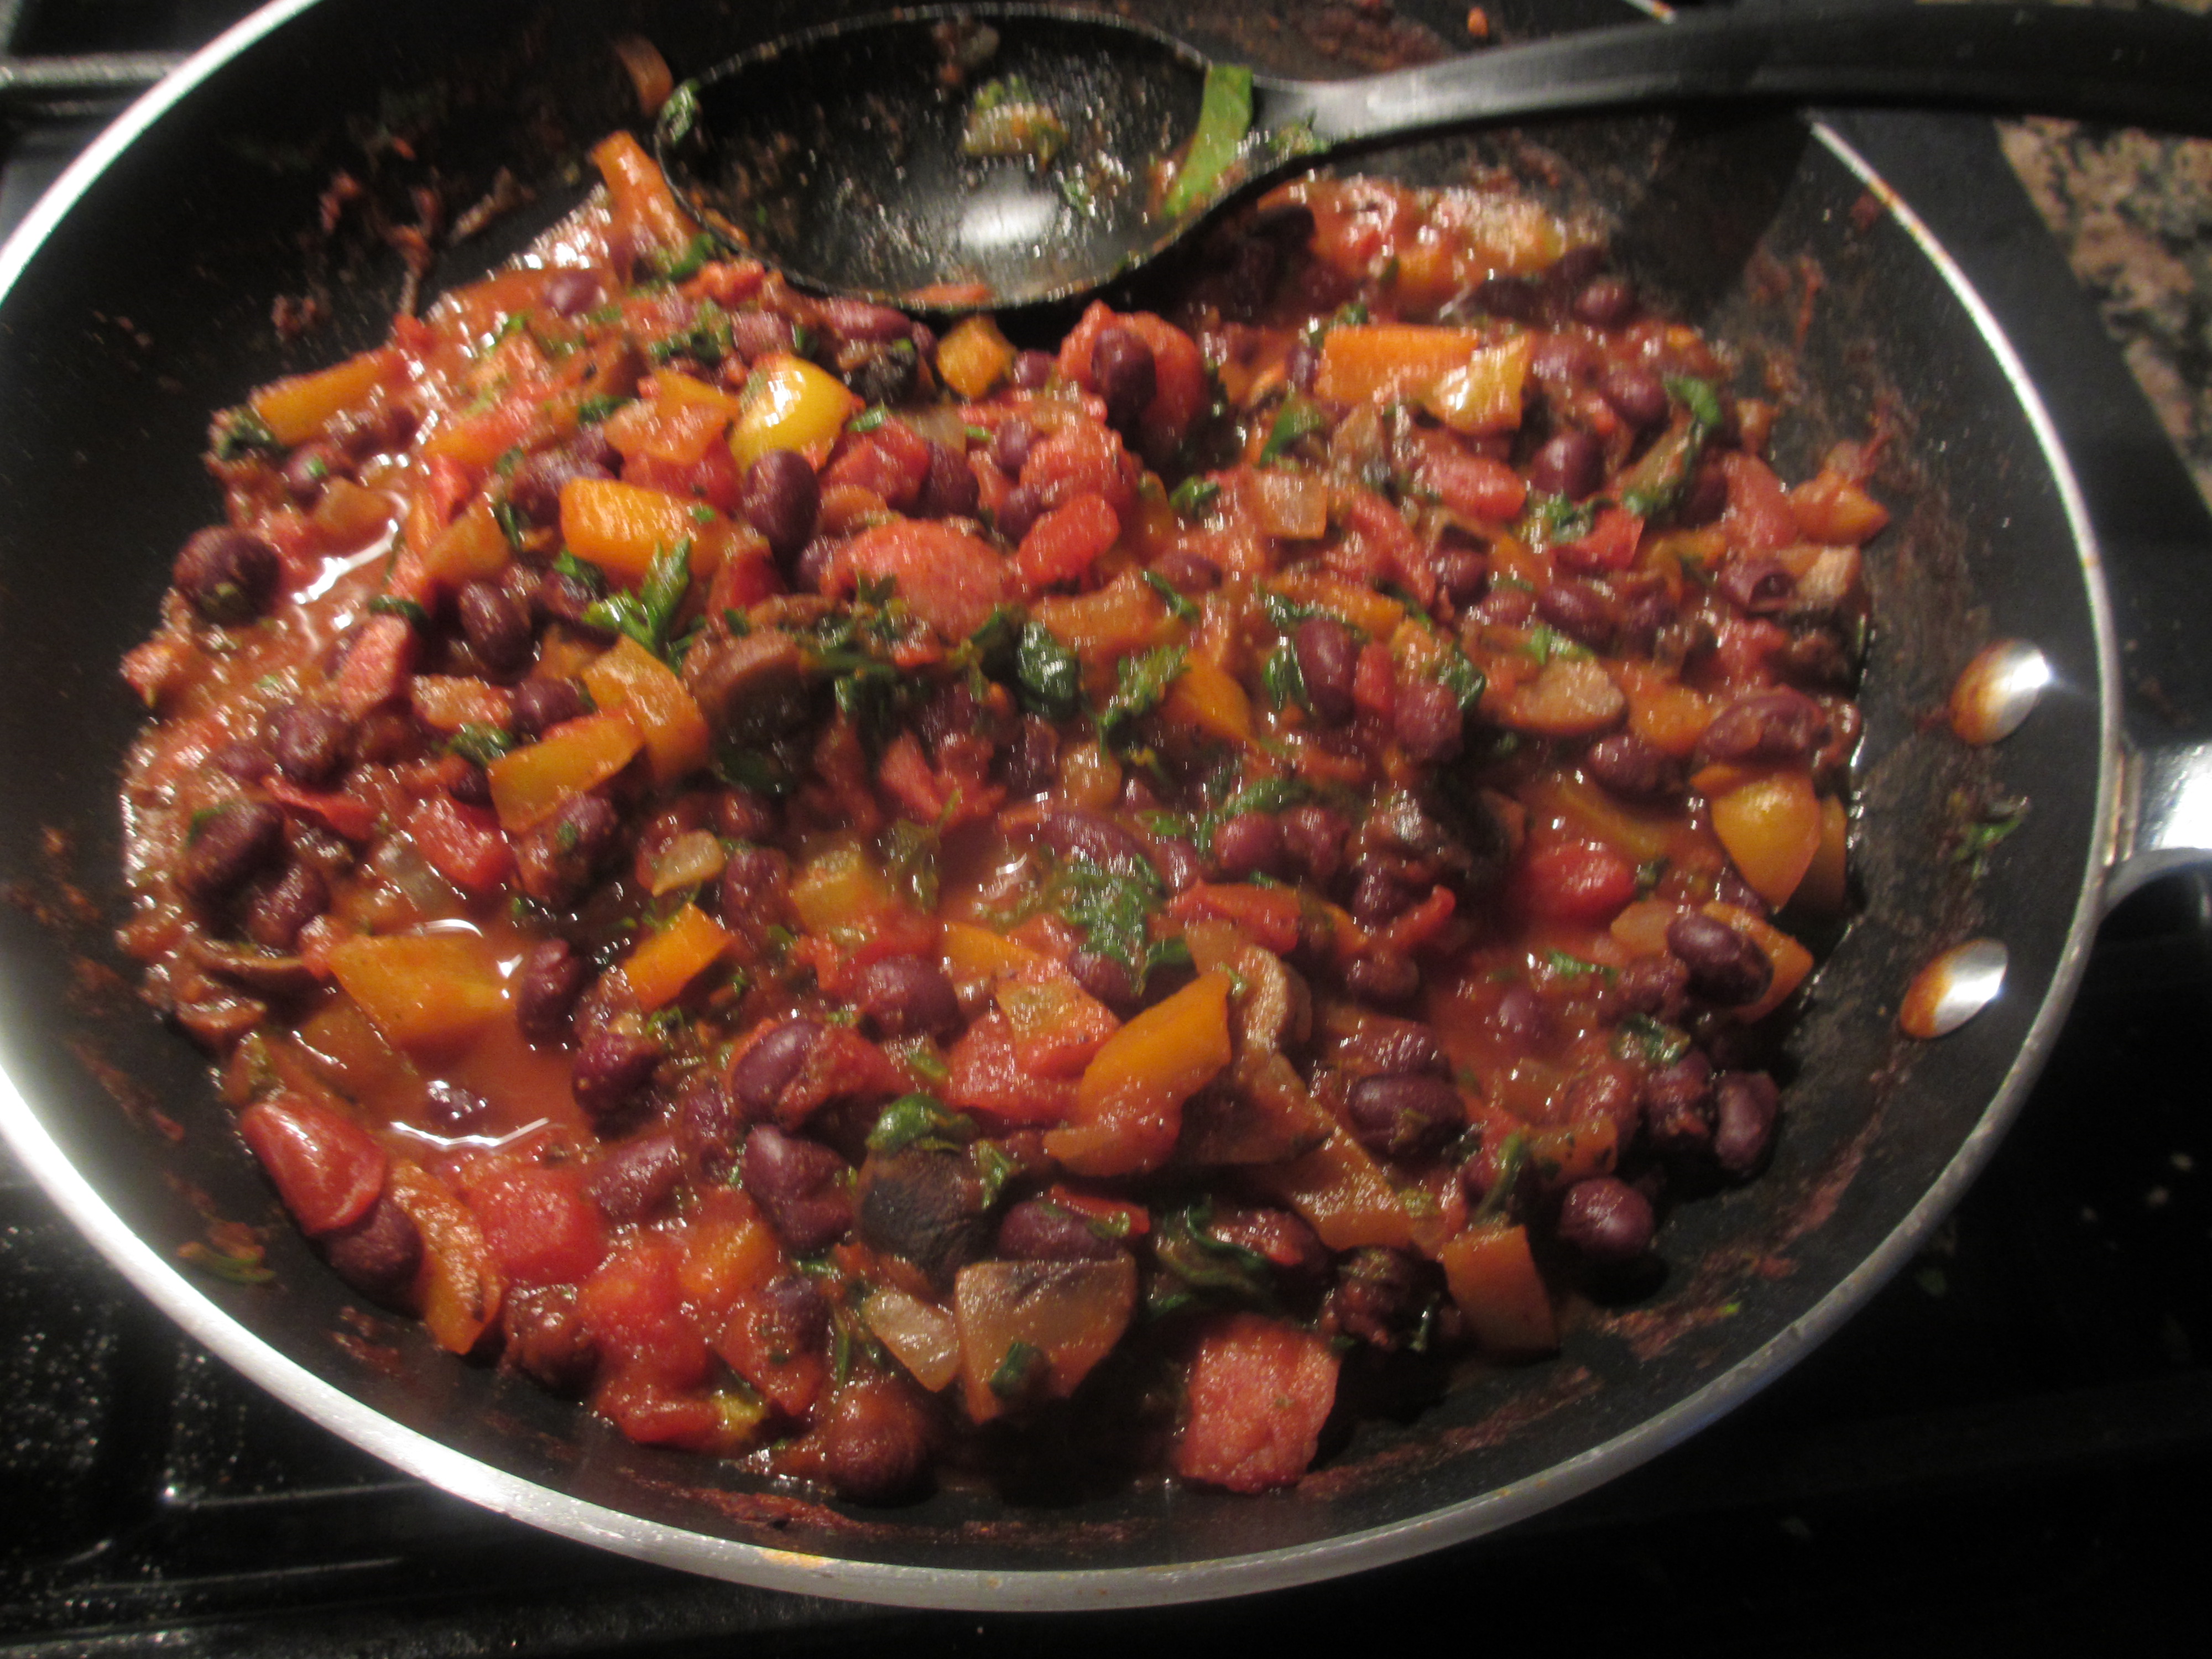 Cooked beans, peppers, onions, sausage, and diced tomatoes